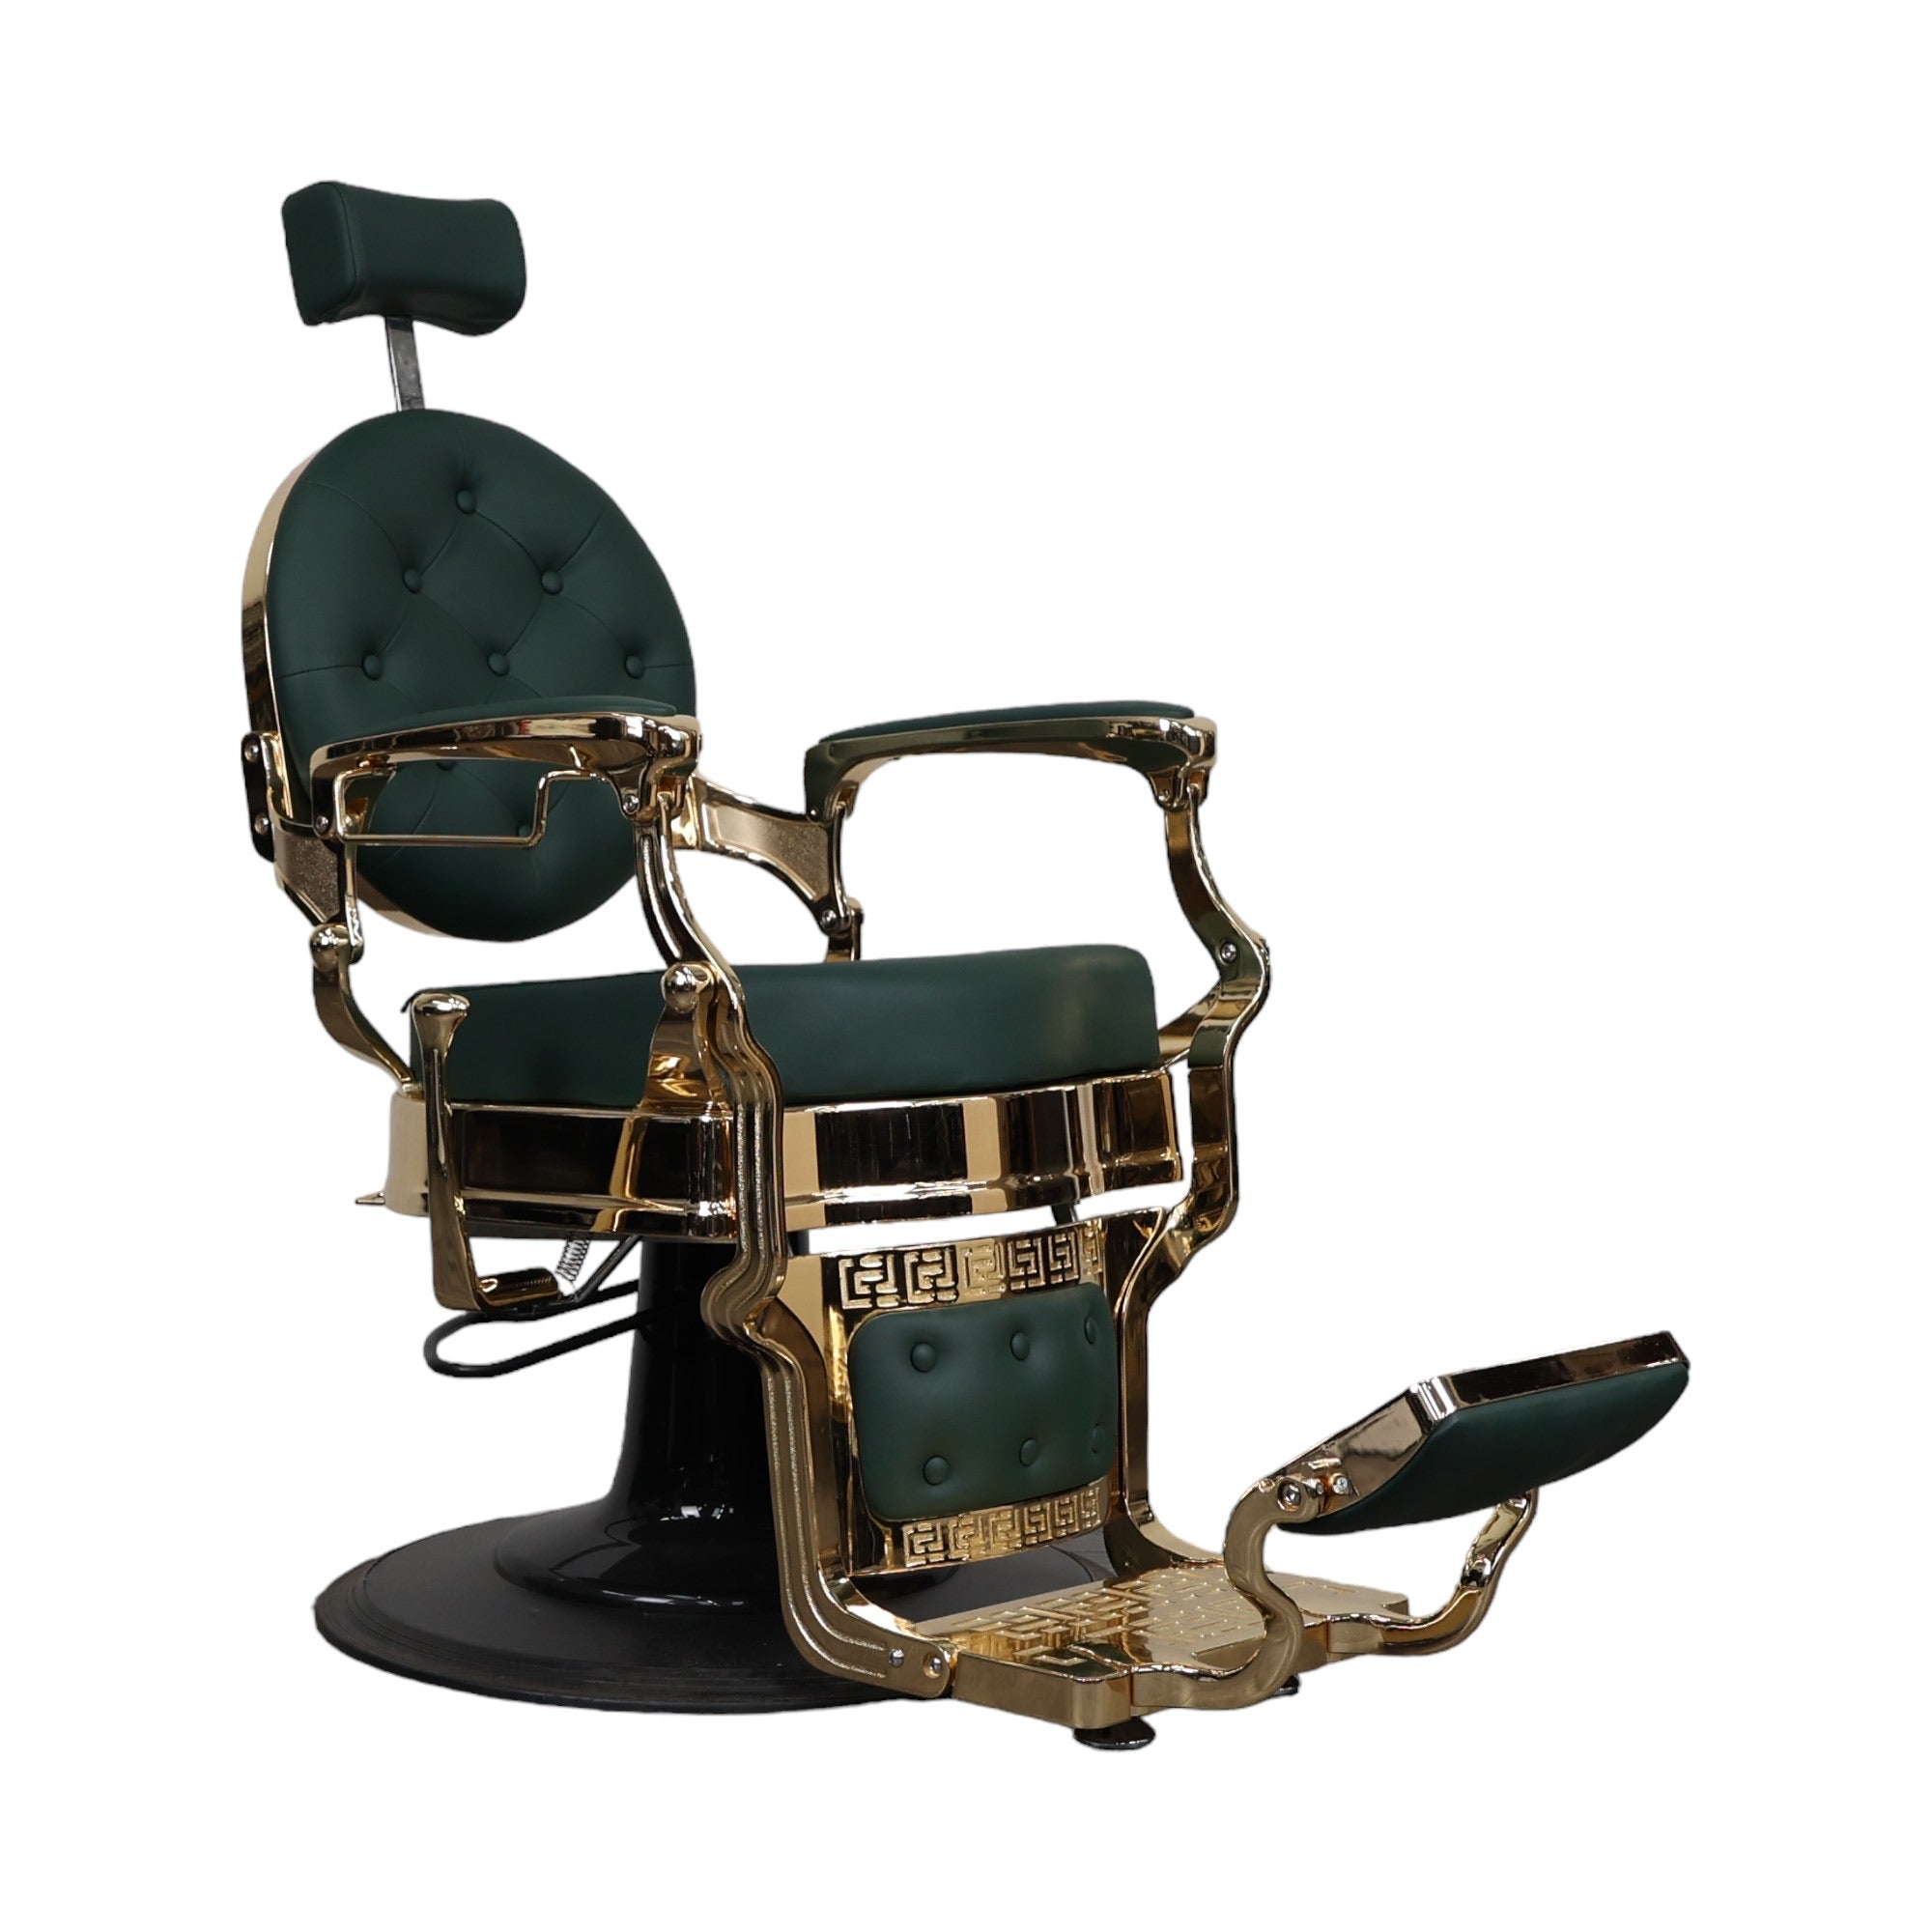 Barber Chair - Vintage Style Green Leather with Gold Accents